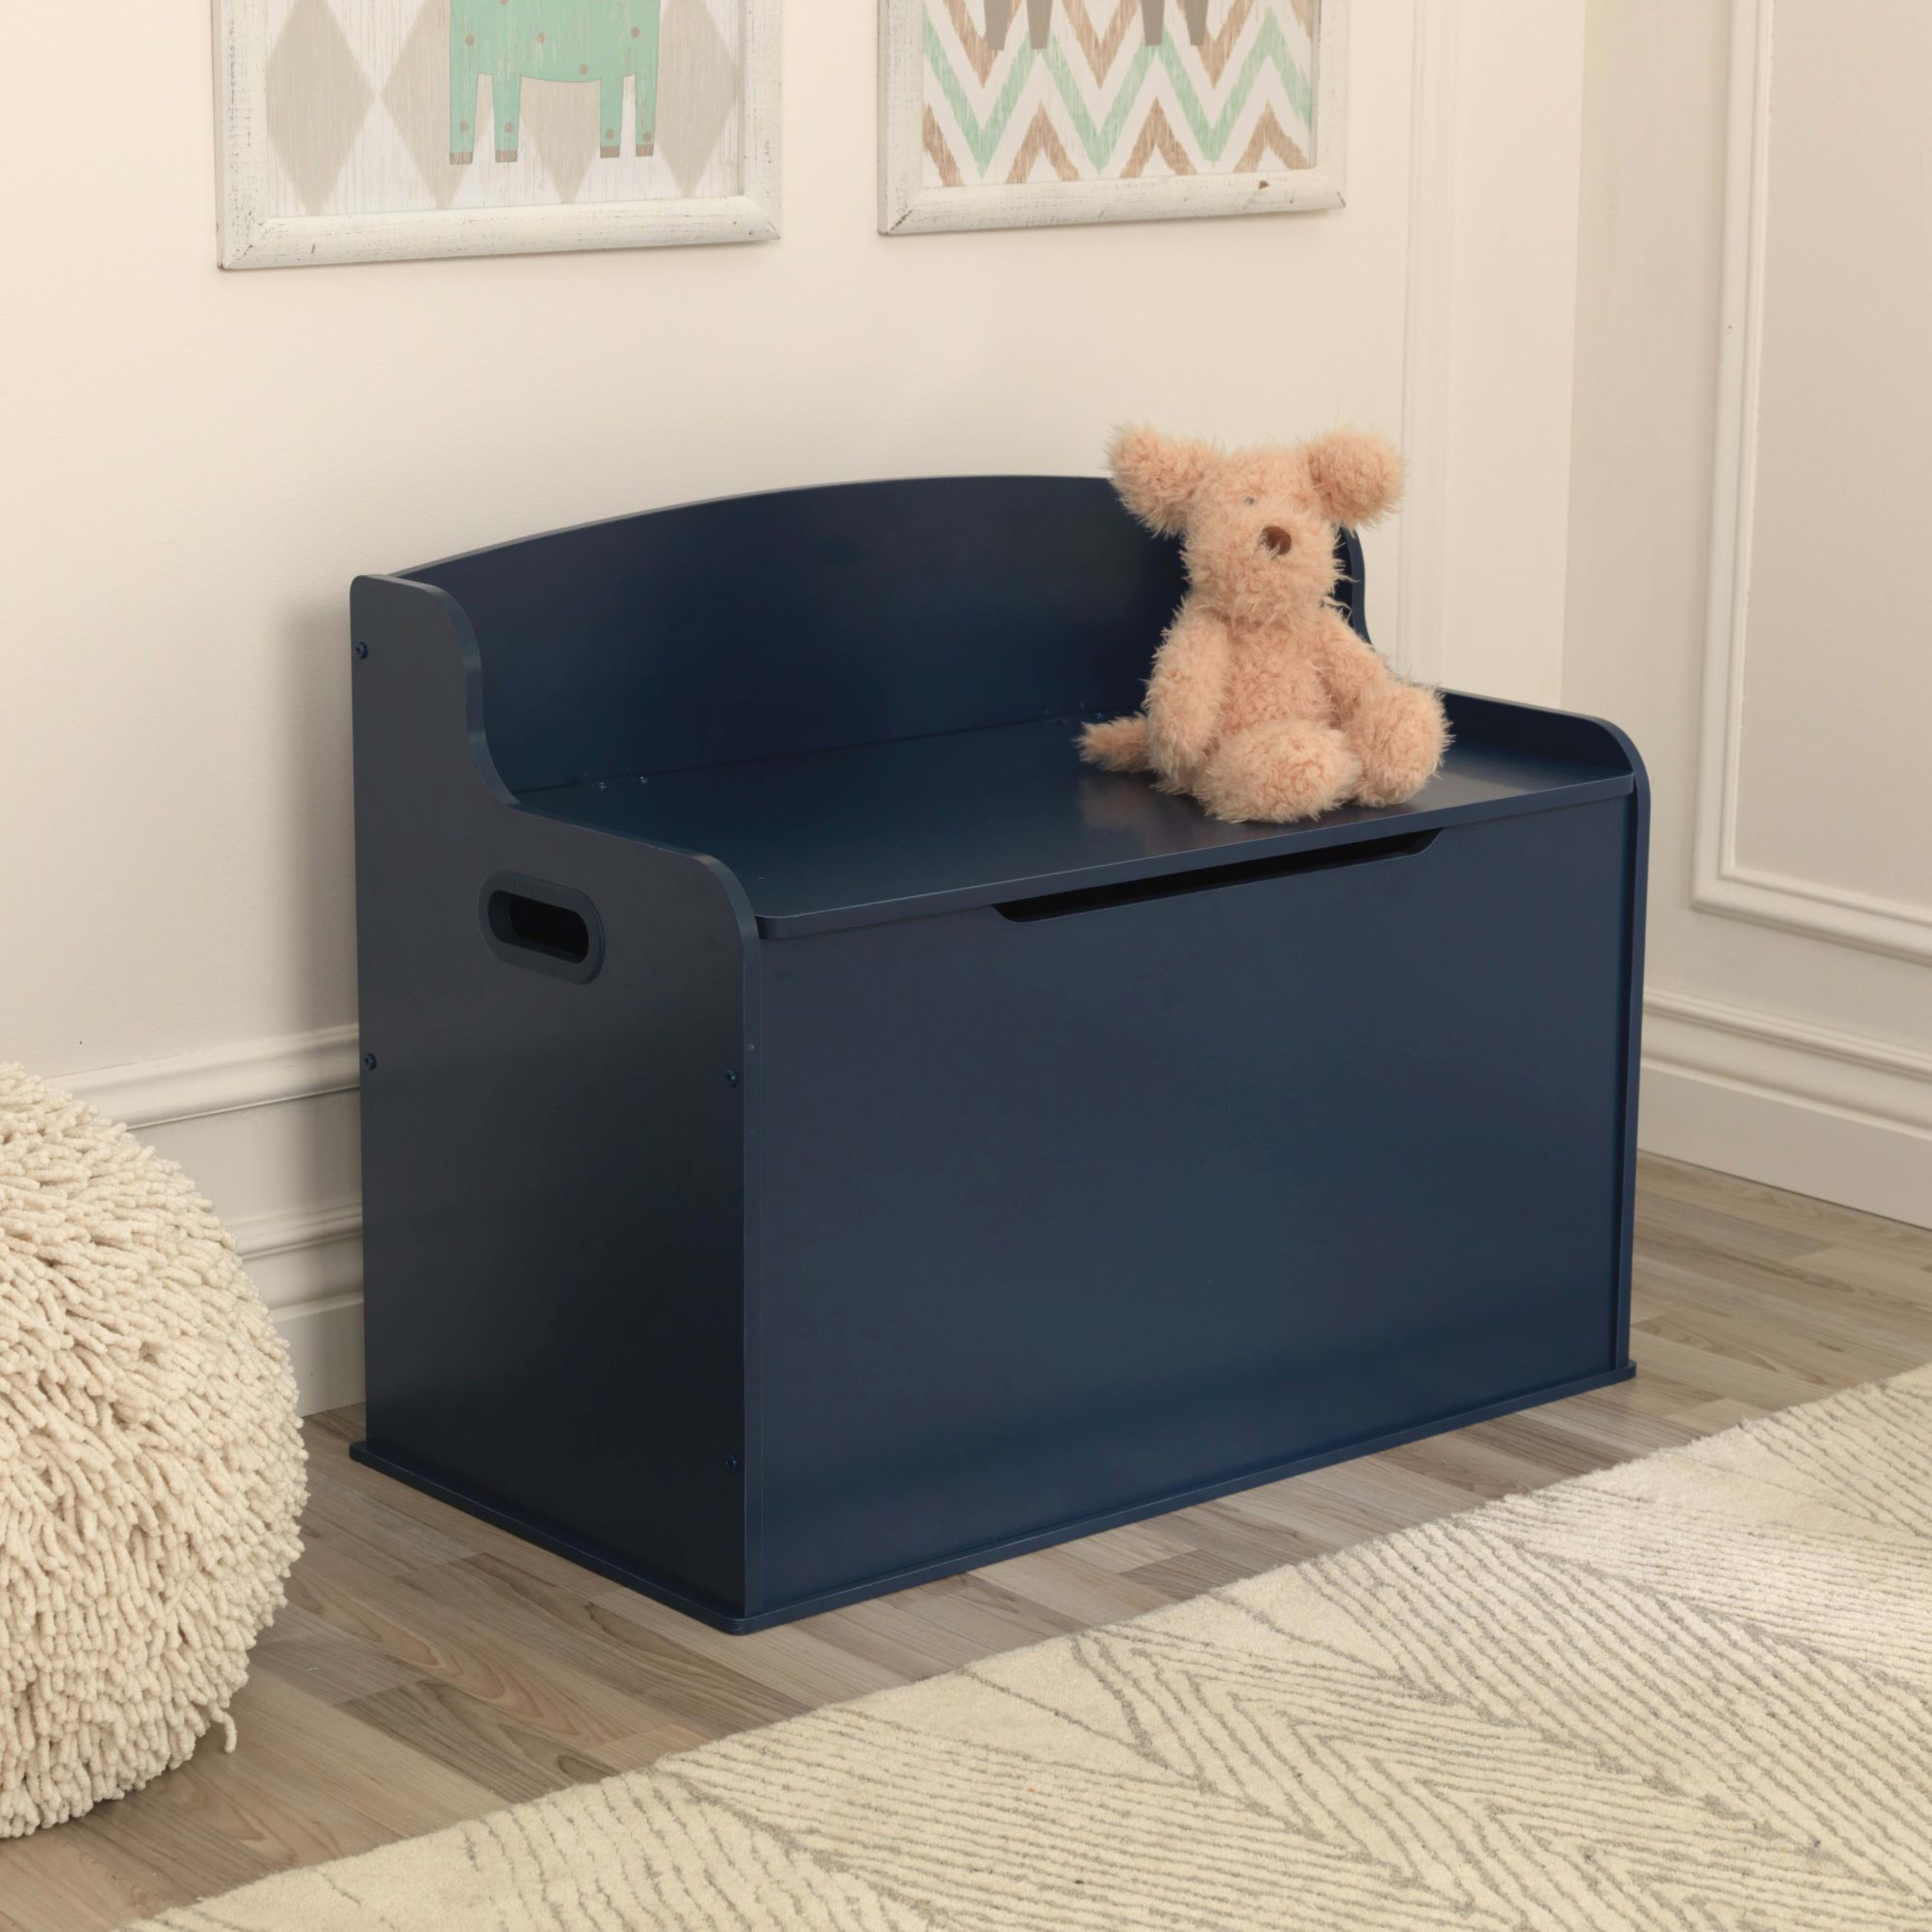 KidKraft Fill with Fun Wood Toy Box or Bench, Blueberry - image 3 of 6